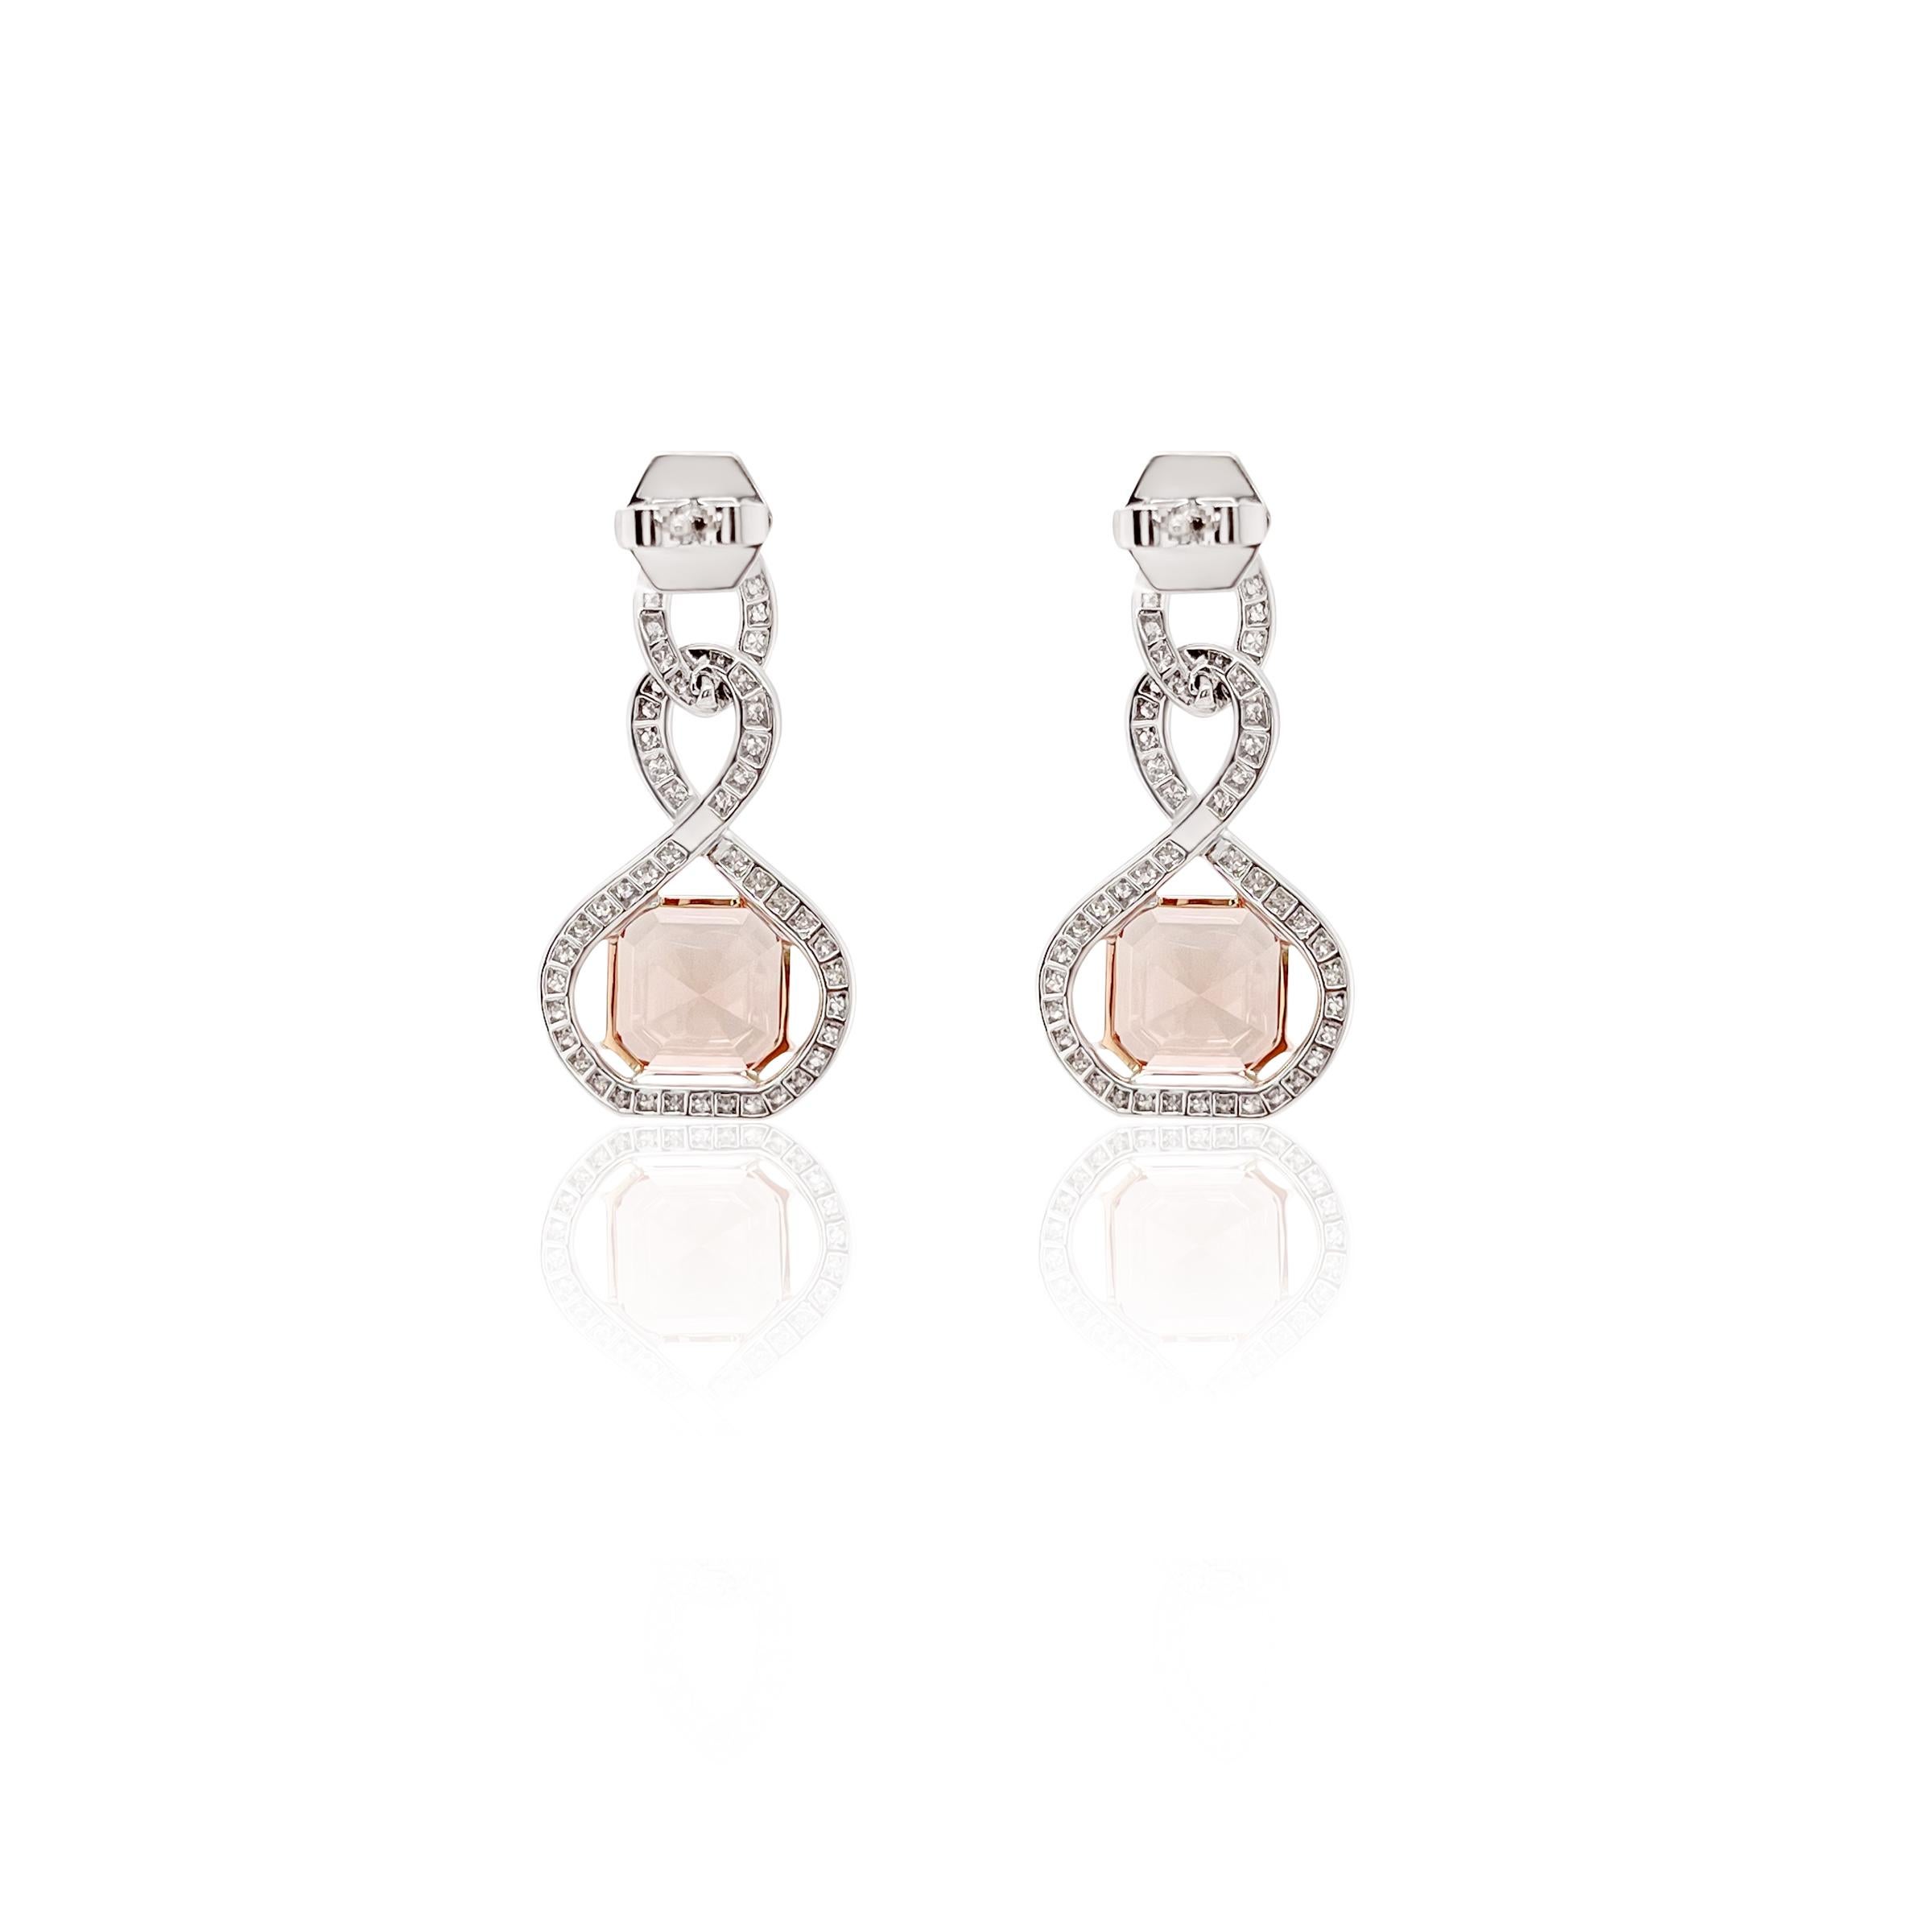 These peach tourmaline and diamond earrings make a bold and stunning statement while offering delicate sparkle. The perfectly cut pair of faceted ascher cut tourmalines are adorned with pave'd diamonds set in 18k white gold which add sparkle and is